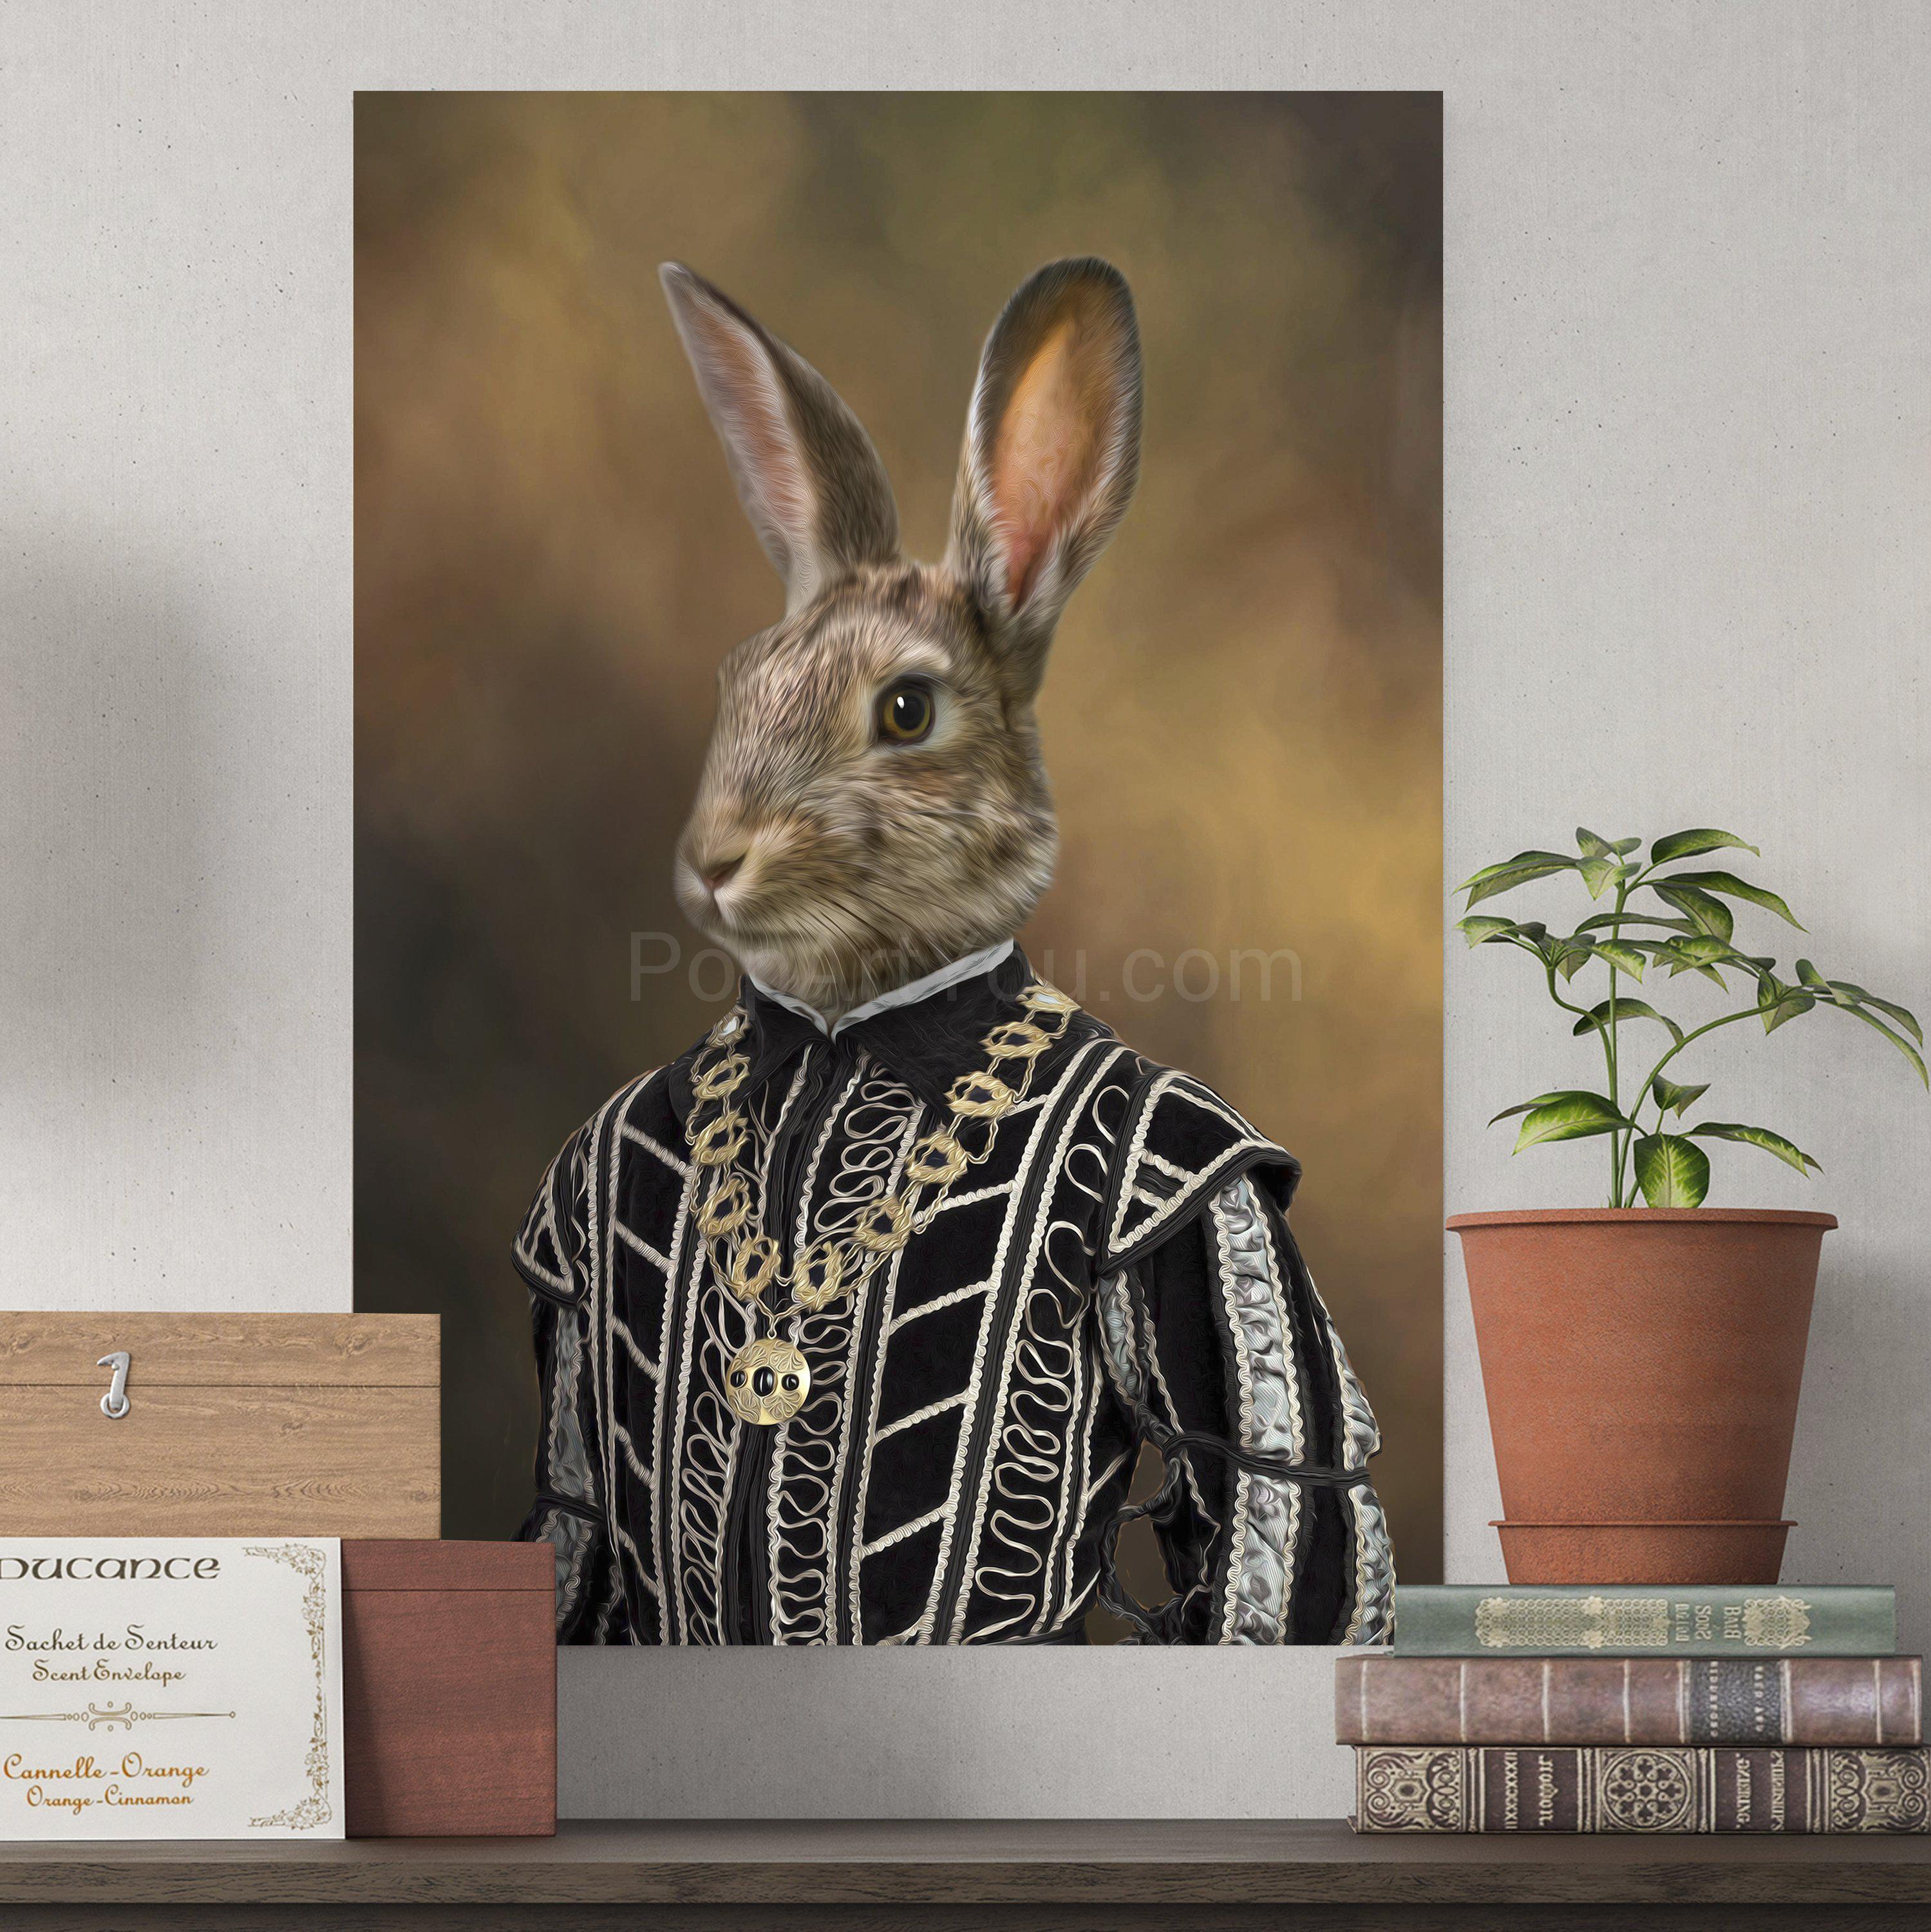 Portrait of a rabbit with a human body, dressed in historical costume, hangs on a white wall next to a flower in a pot and books